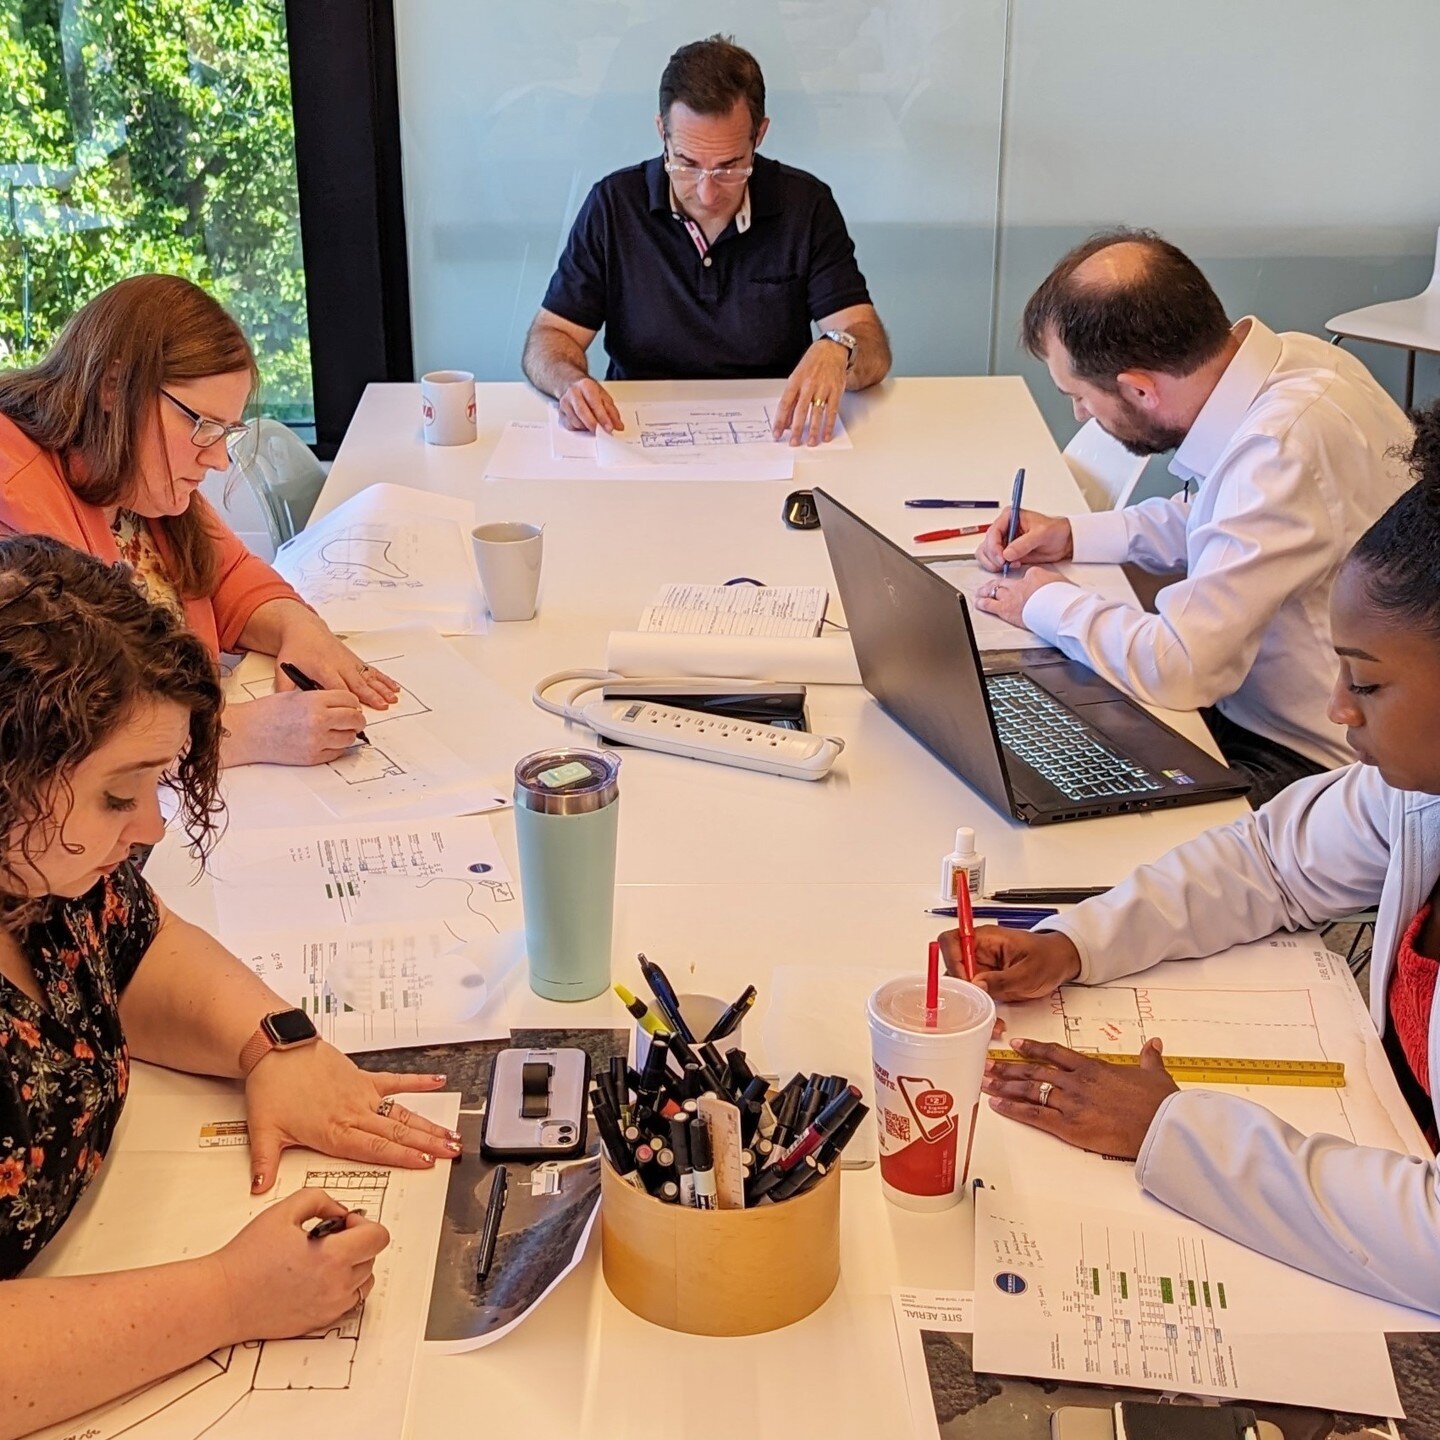 We recently came together as an office to have a charette. This involved collective brainstorming and developing site sketches. 

There are numerous benefits in crafting a design in this way:

- Enhanced Collaboration
- Efficient Problem-Solving
- In